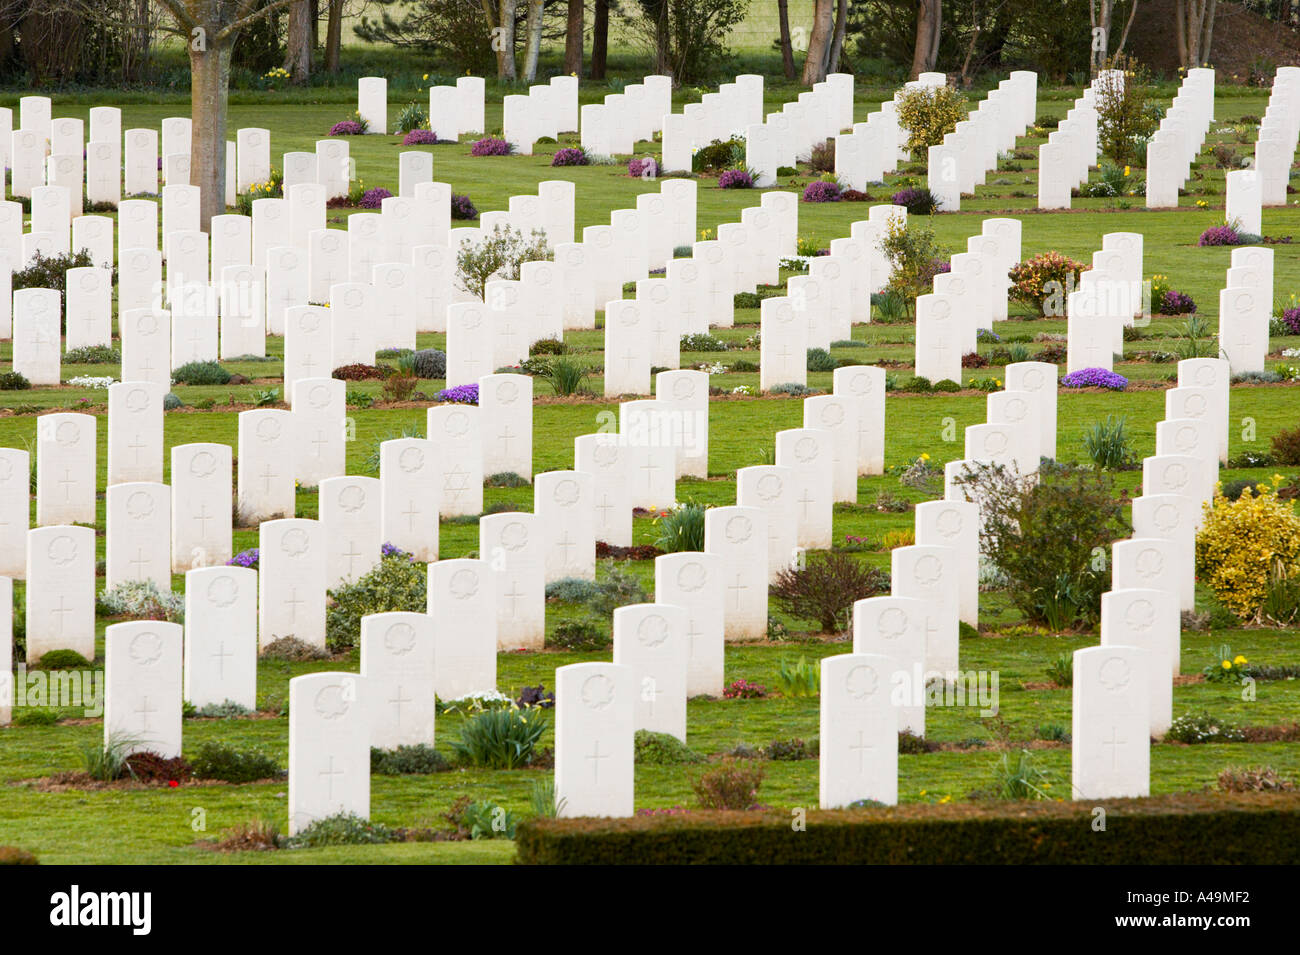 War Graves Canadian cemetery at Beny Sur Mer Normandy France Stock Photo